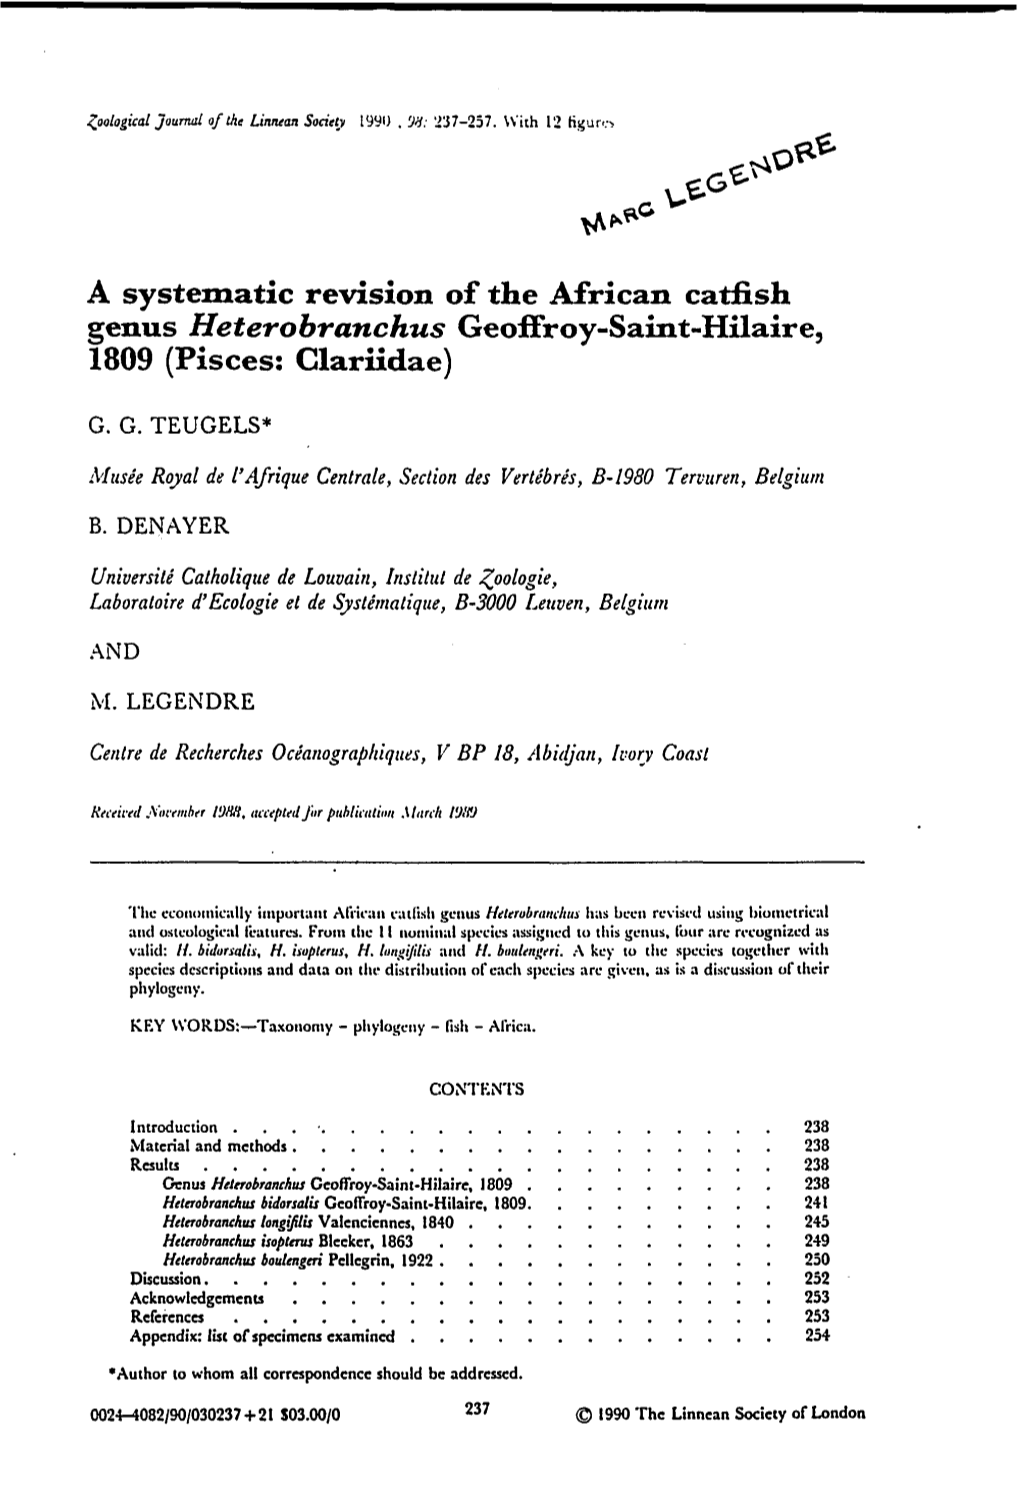 A Systematic Revision of the African Catfish Genus Heterobranchus Geoffroy-Saint-Hilaire, 1809 (Pisces: Clariidae)